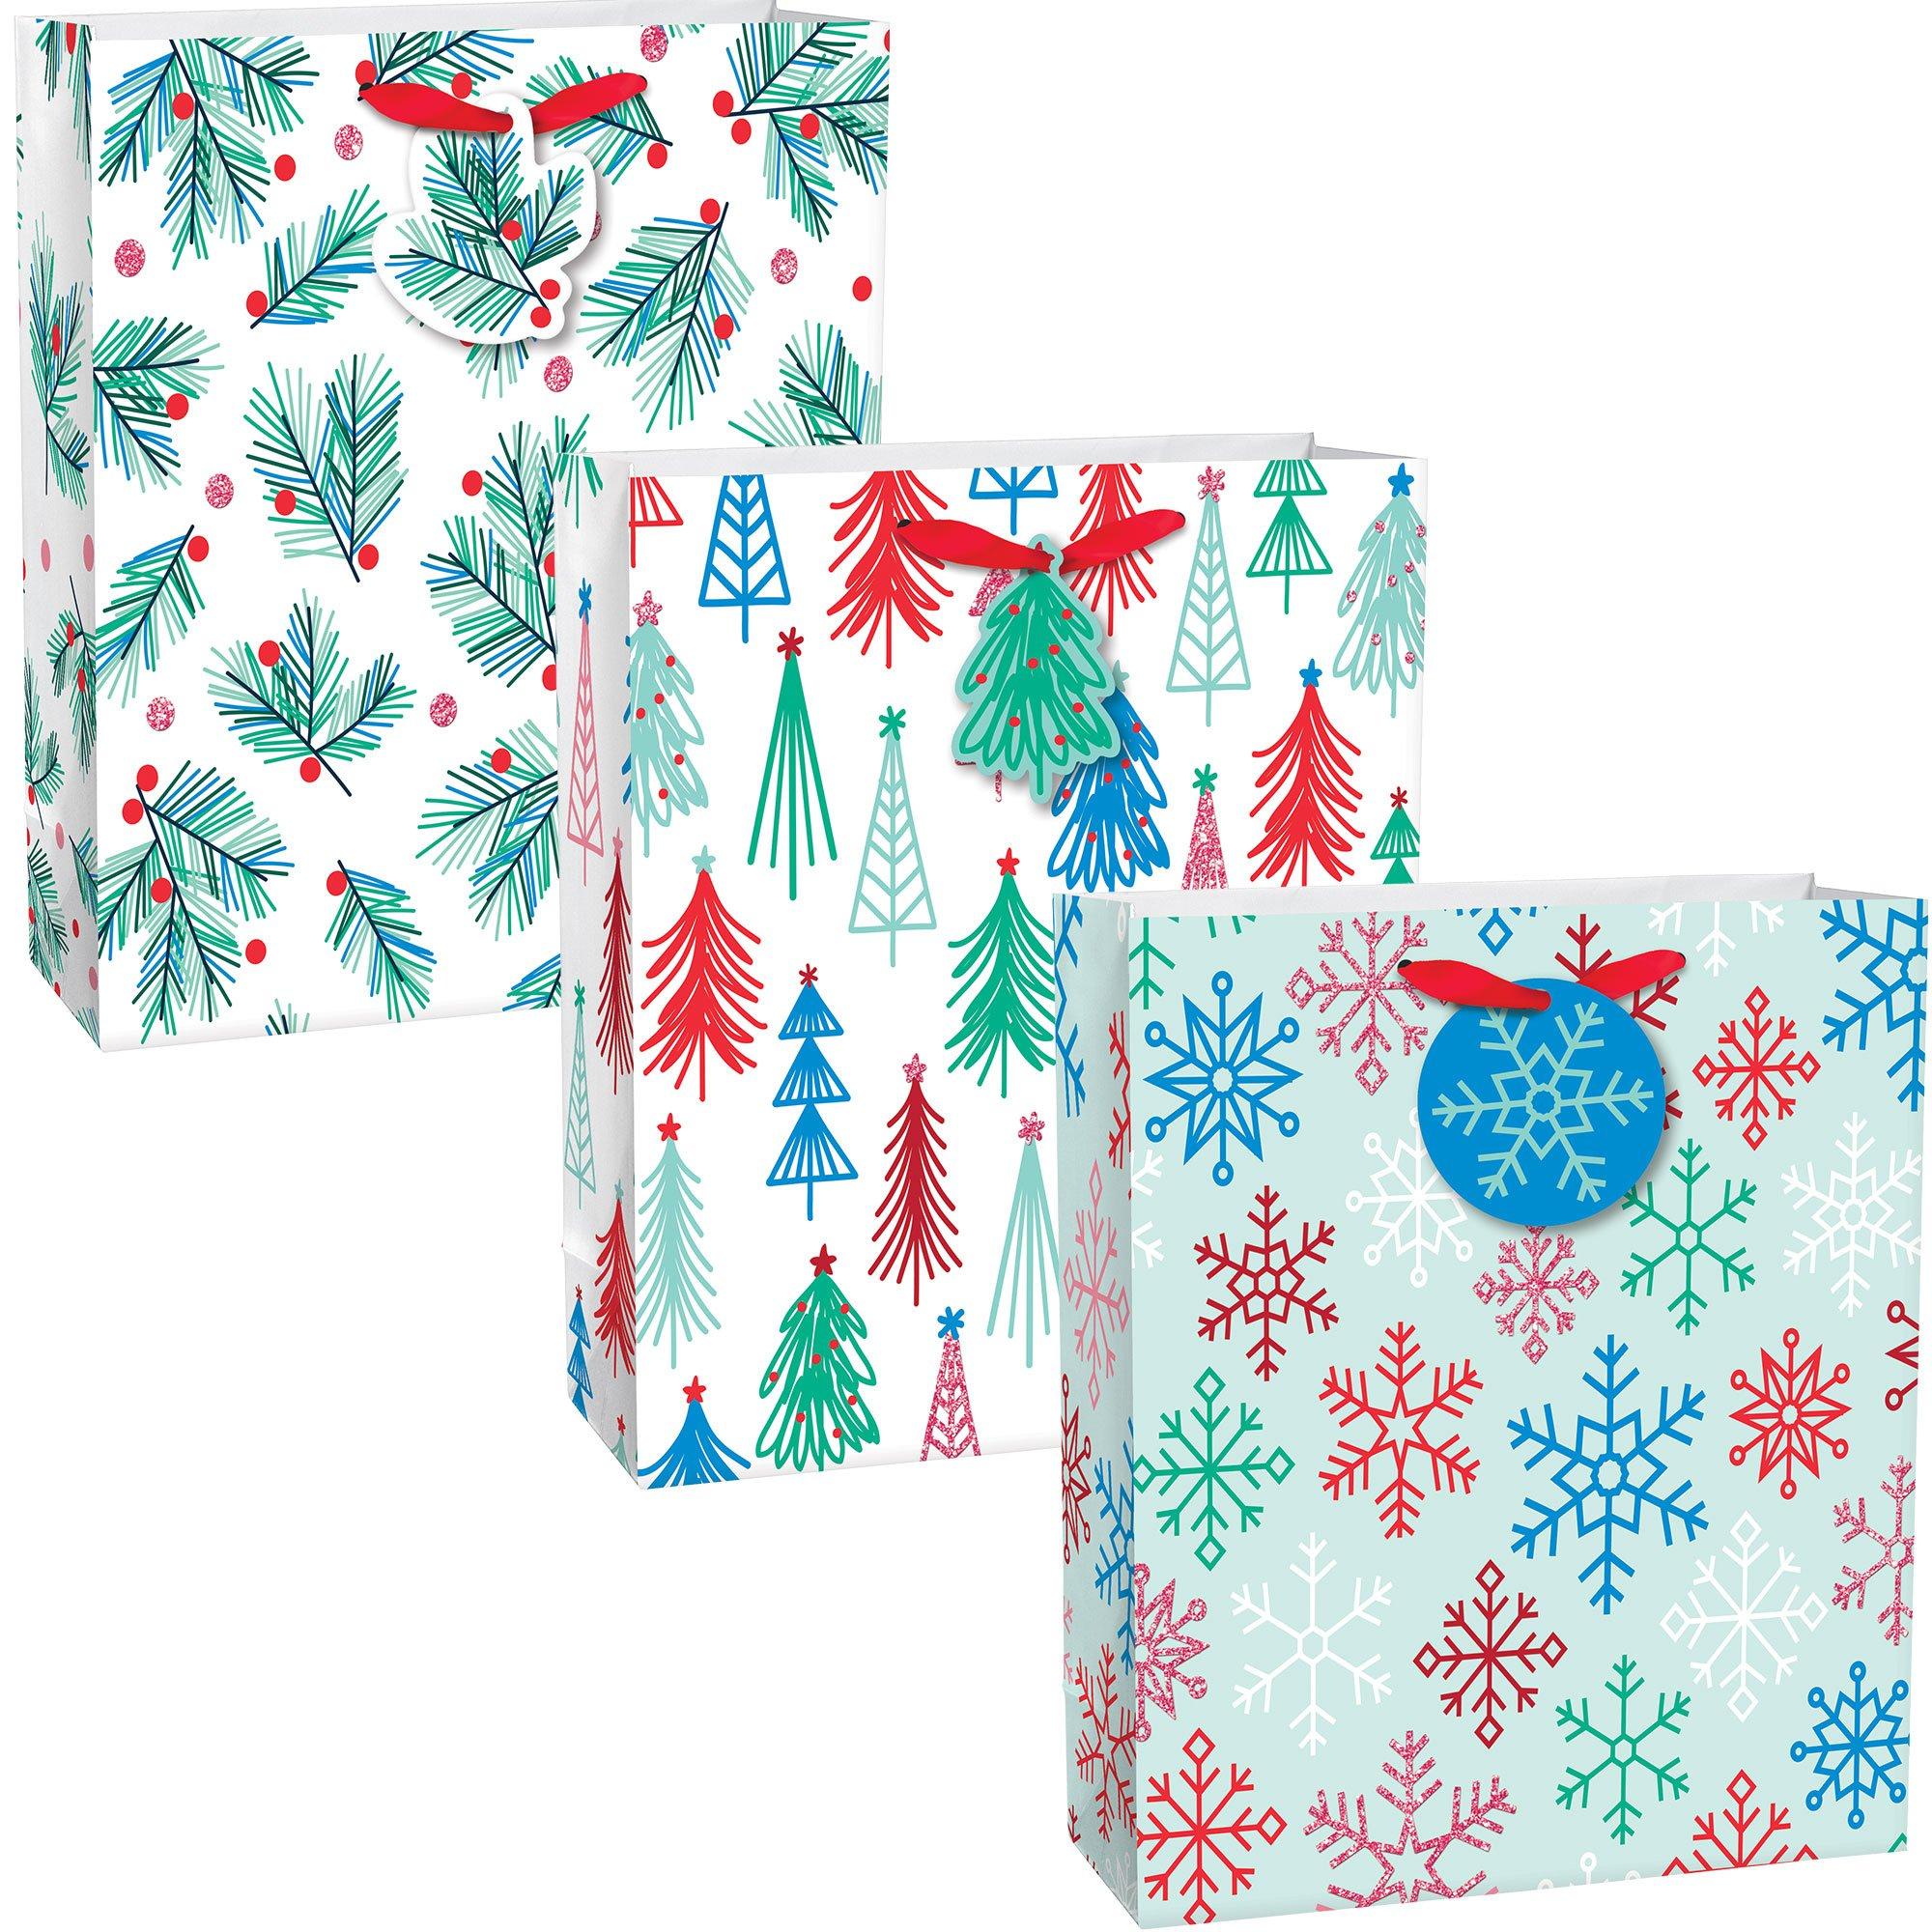 Christmas Reusable Plastic Tote Bag, 20in x 16in